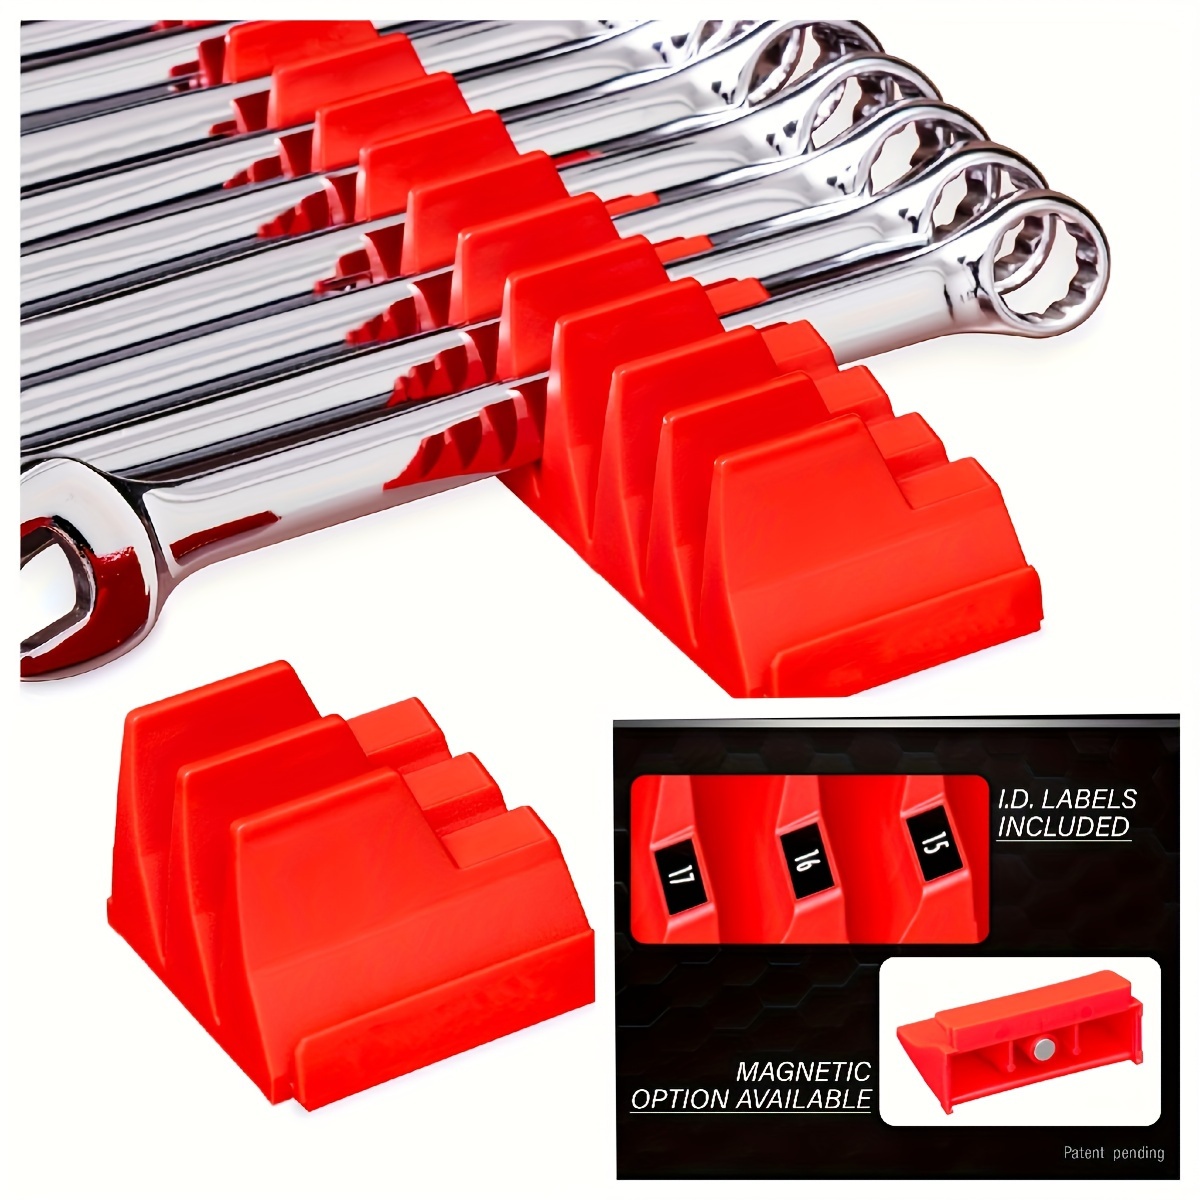 

20-slot Organizer - Durable Plastic, Hex Head Style, Space-saving Tool Holder For Toolbox